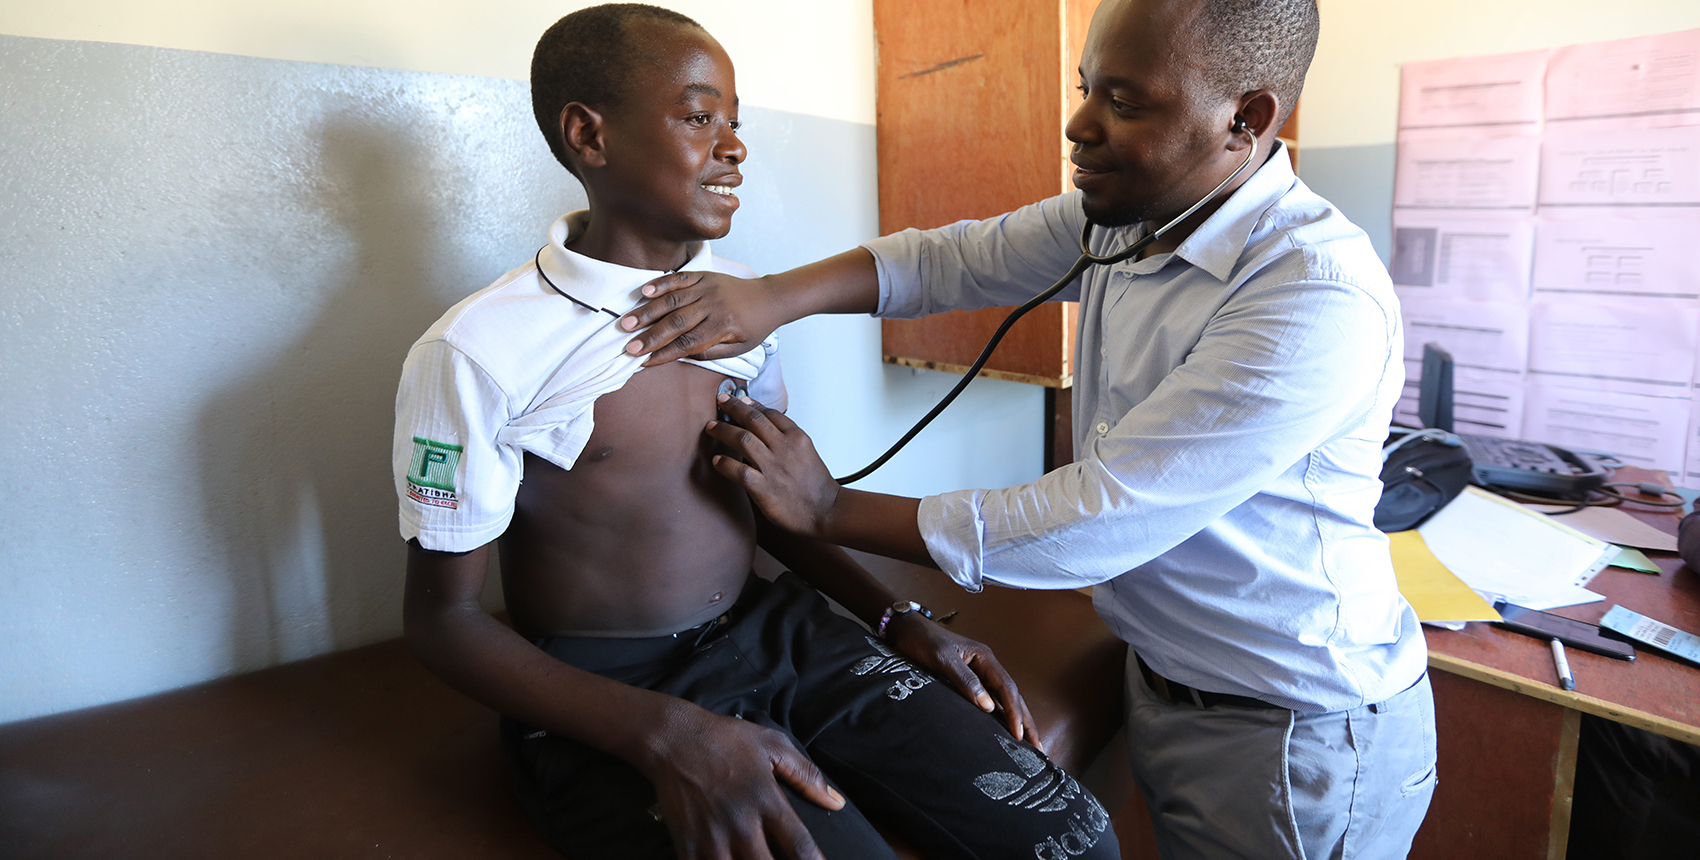 A teenage boy sits on an examination table in a clinic as a man listens to his heart with a stethoscope.